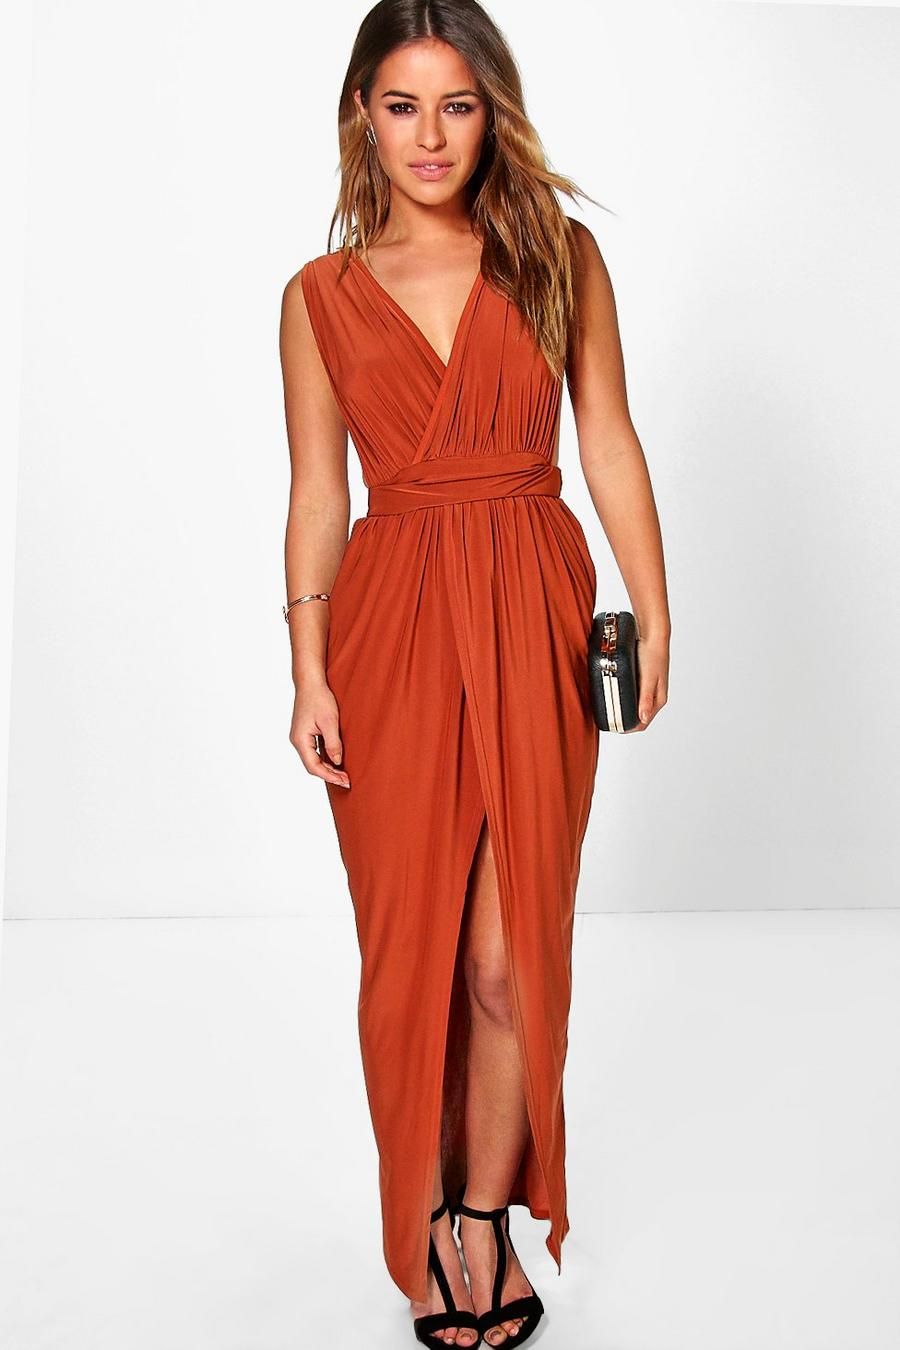 Feel Elegant and Chic in Stylish Petite
Maxi Dresses: Effortless and Sophisticated